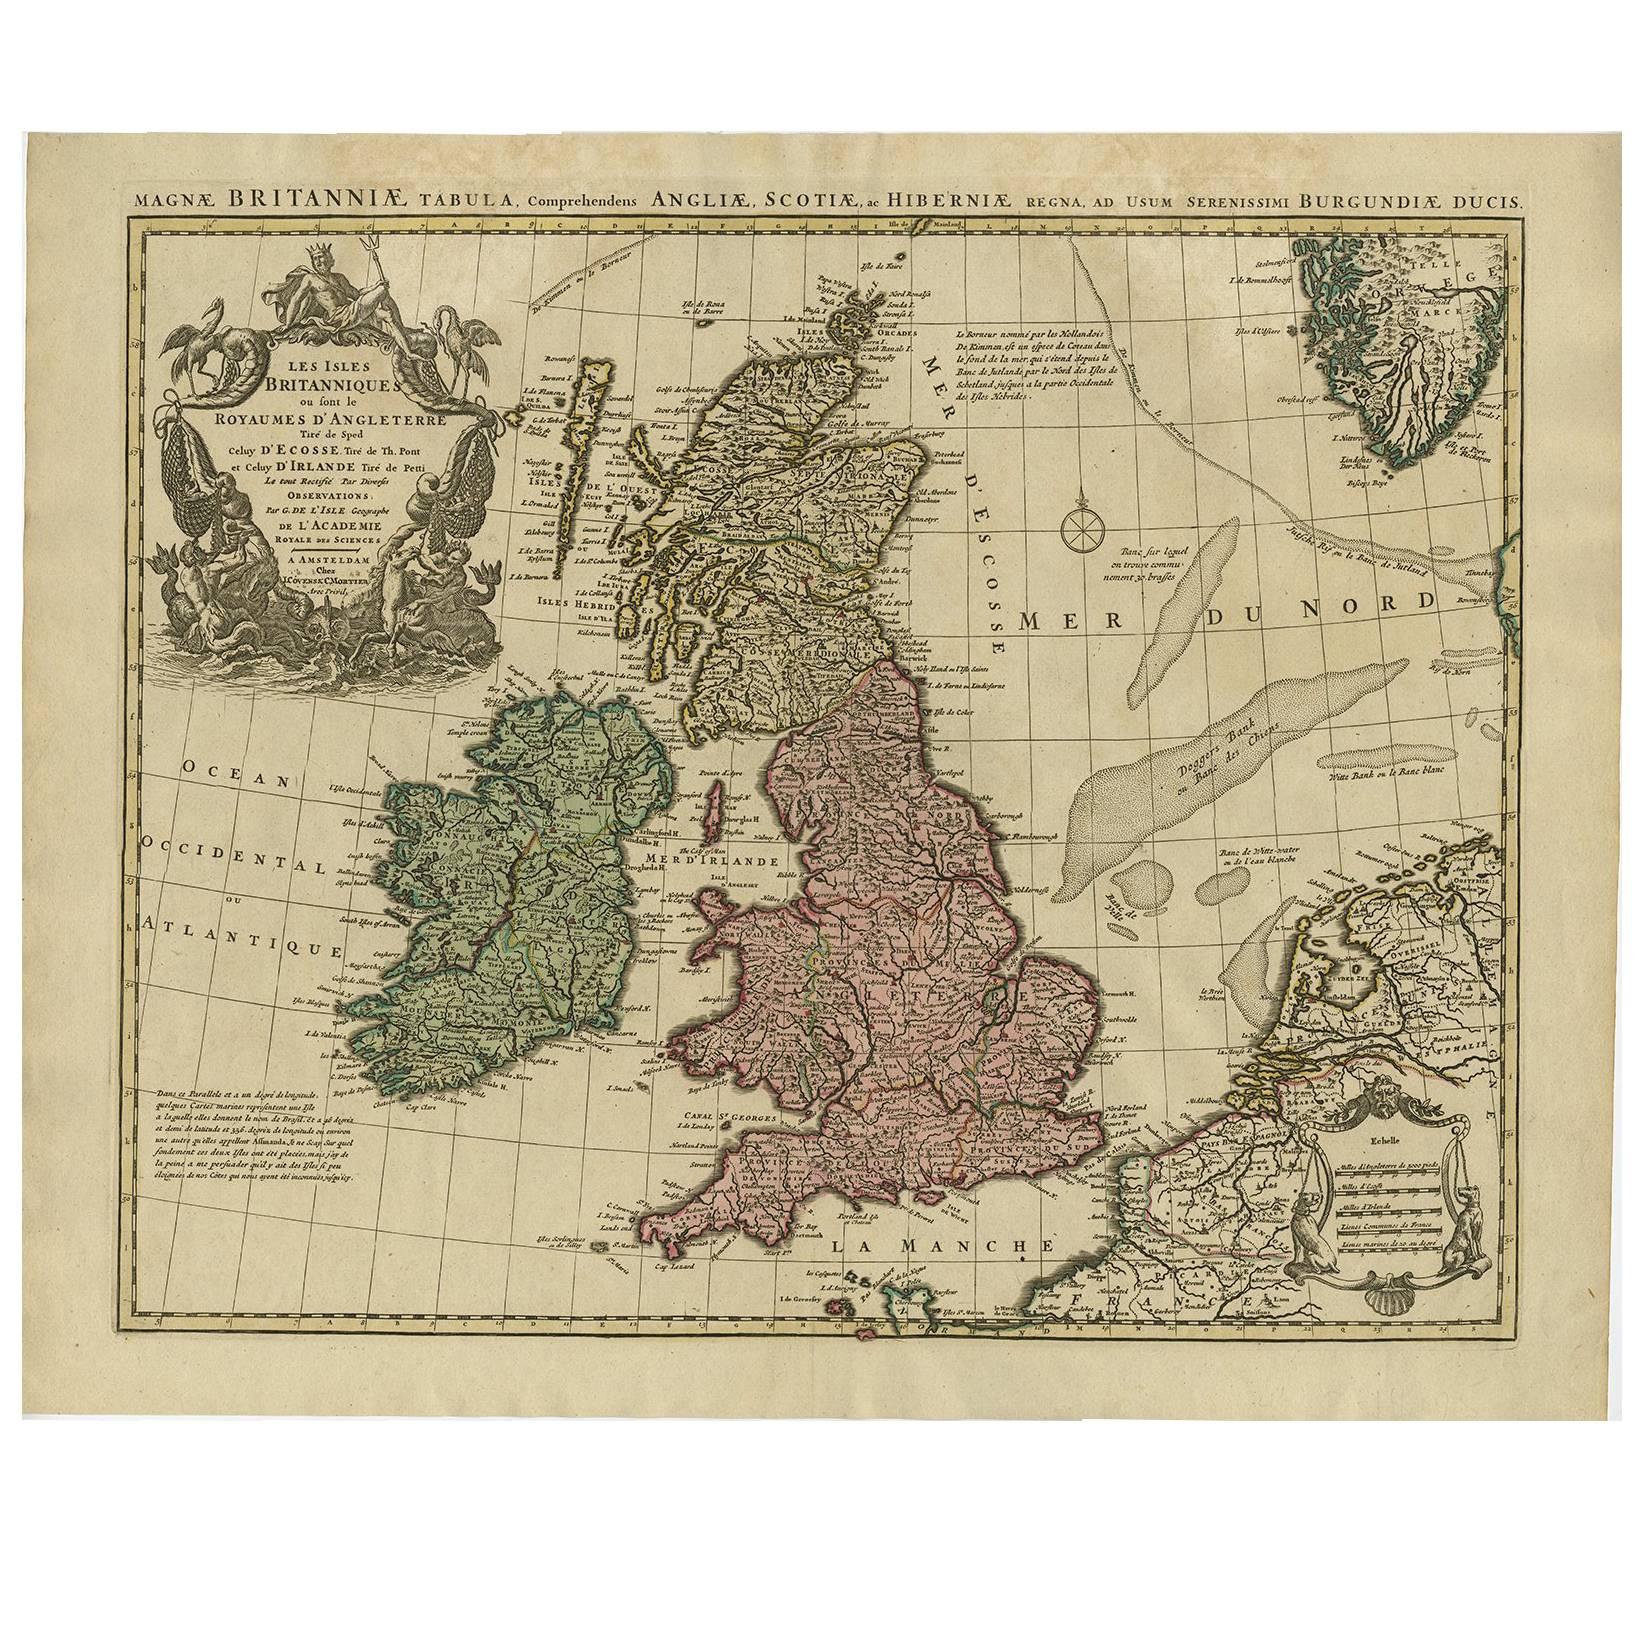 Antique Map of the British Isles by Covens & Mortier, 1730